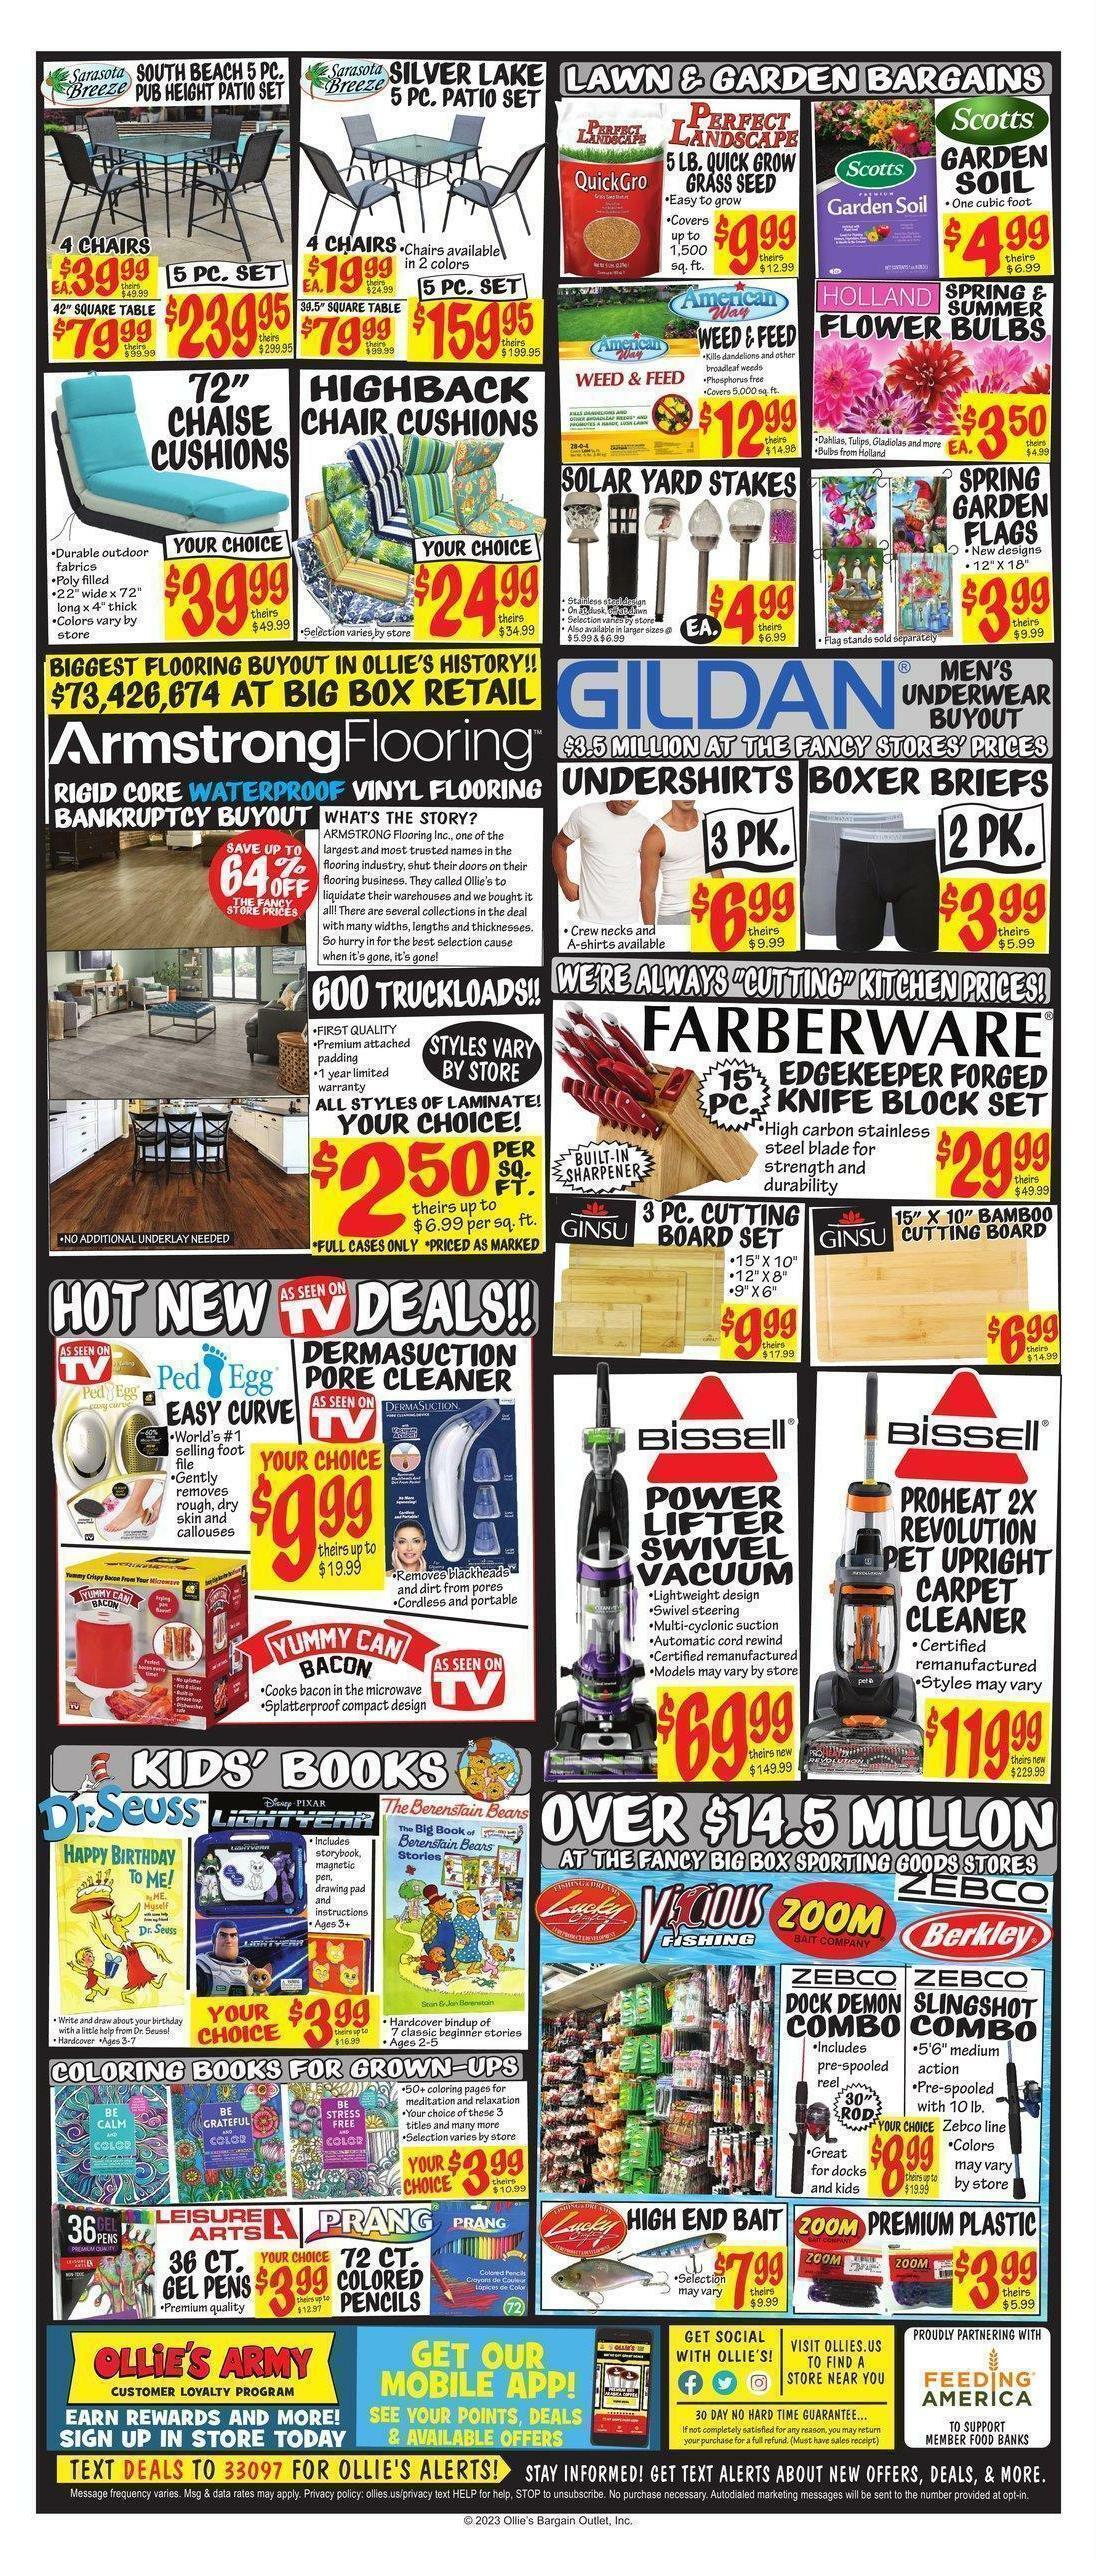 Ollie's Bargain Outlet Weekly Ad from April 19